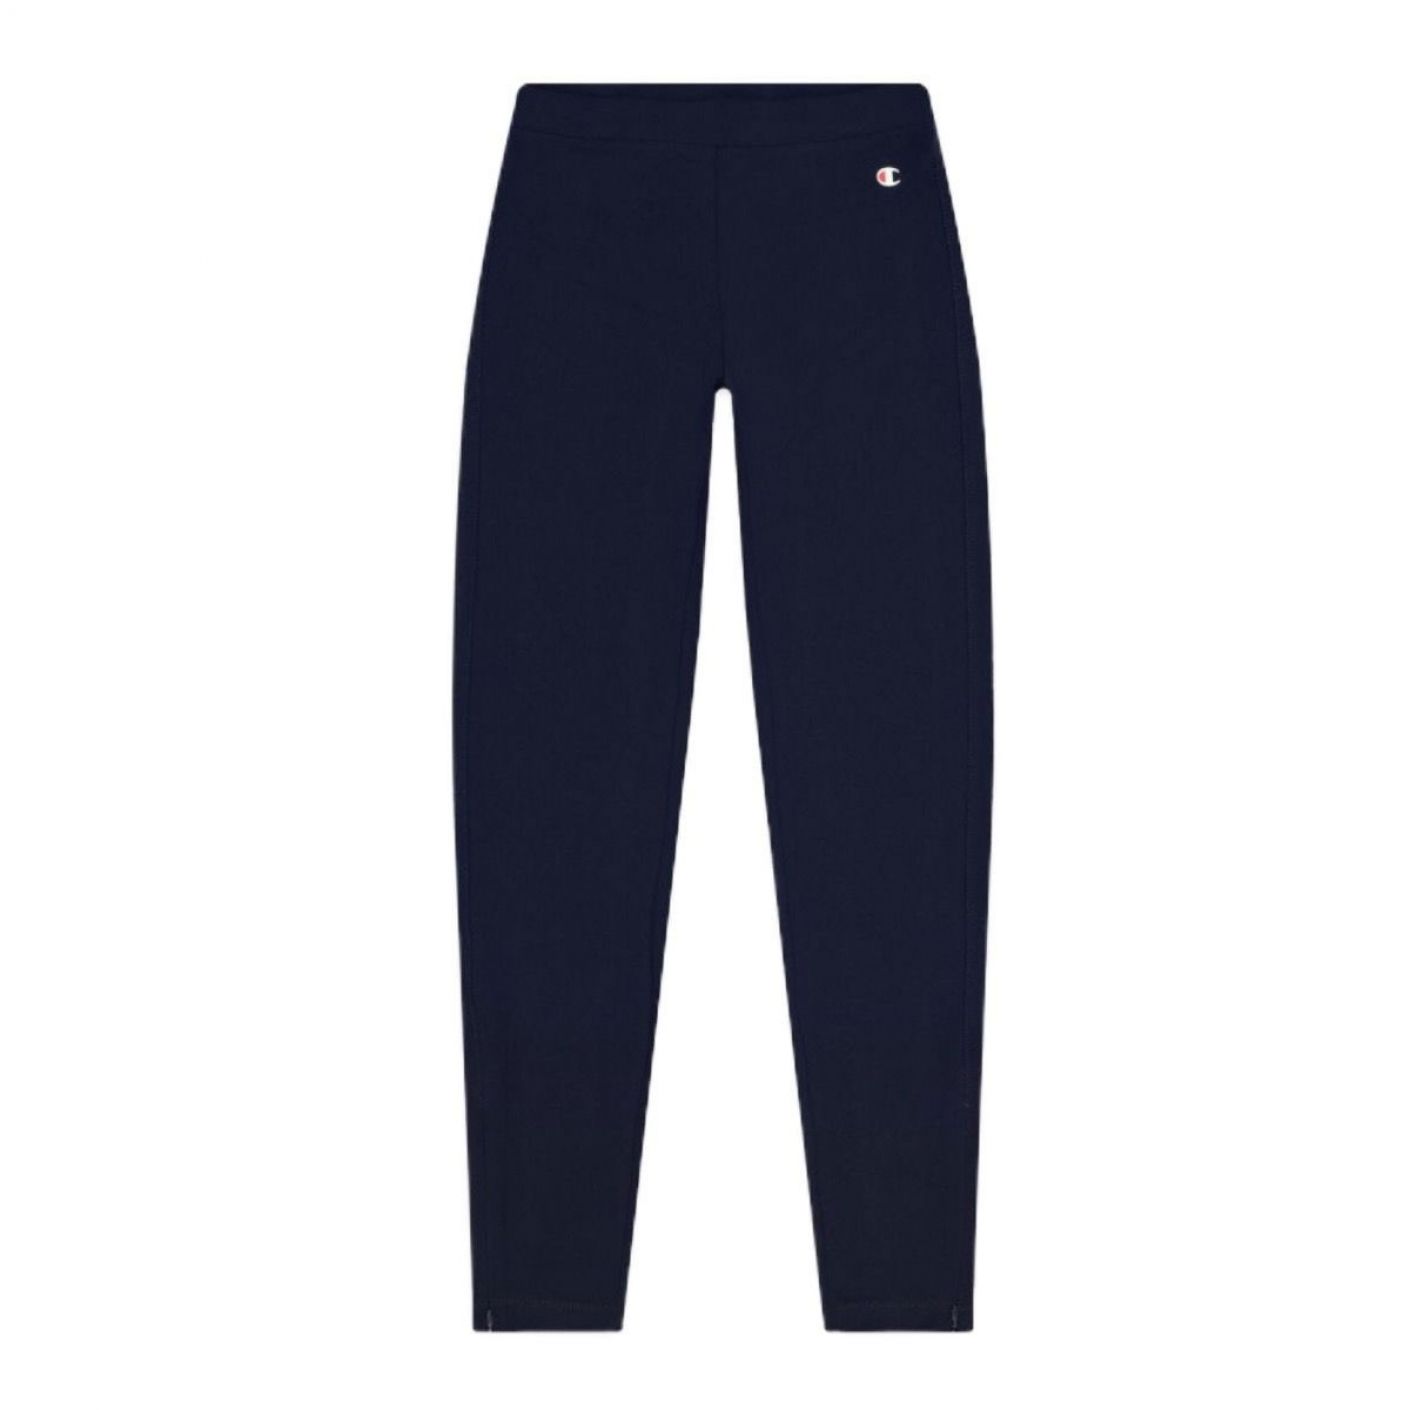 Champion Legging Blue Skinny fit for Woman